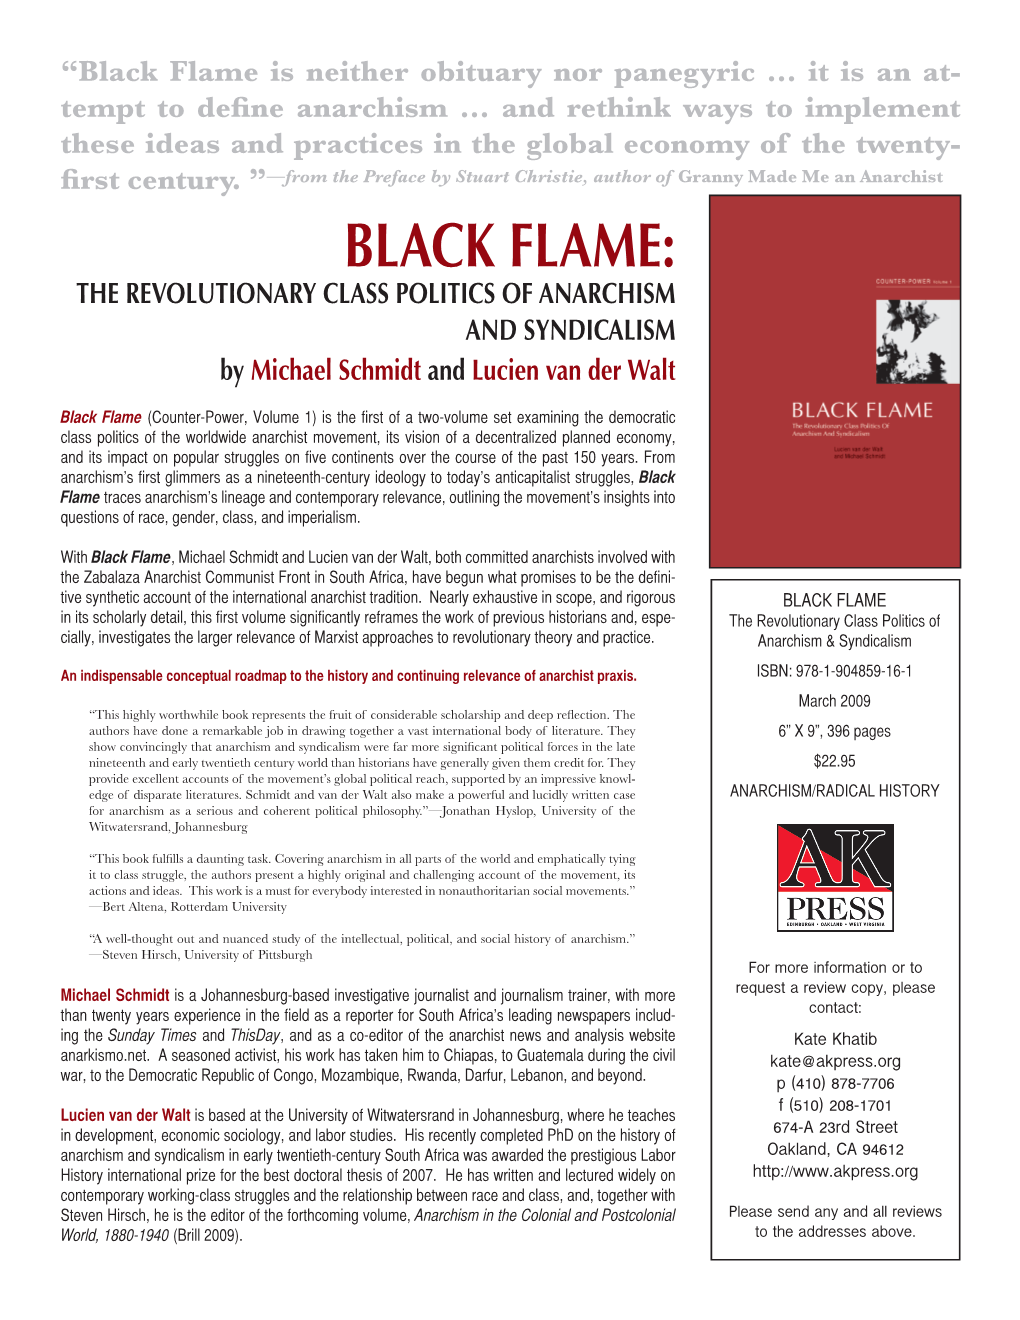 BLACK FLAME: the REVOLUTIONARY CLASS POLITICS of ANARCHISM and SYNDICALISM by Michael Schmidt and Lucien Van Der Walt